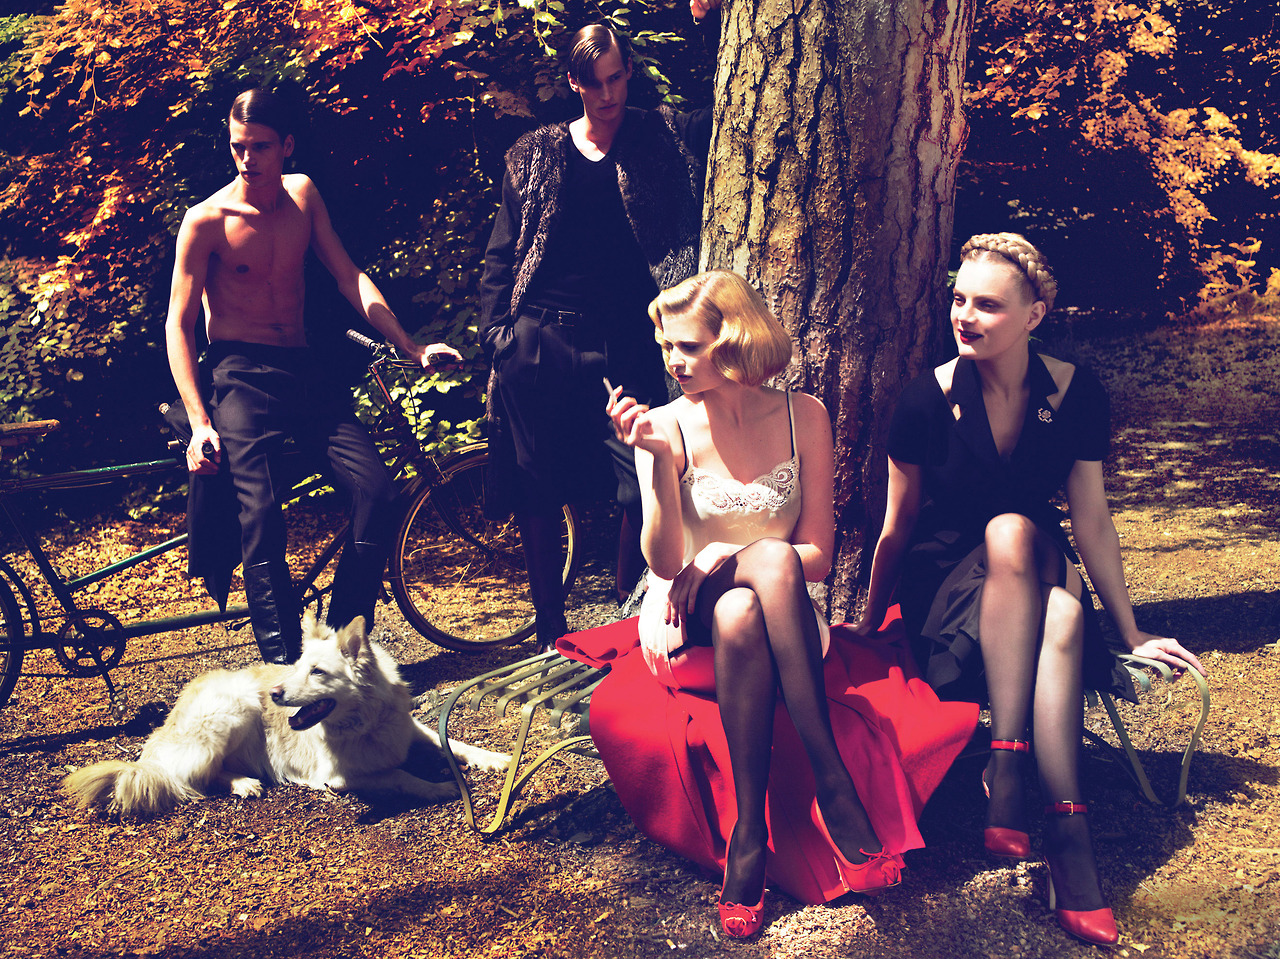 Saturdays in the park<br /> Photograph by Mert Alas and Marcus Piggot; styled by Alex White; W magazine September 2009.